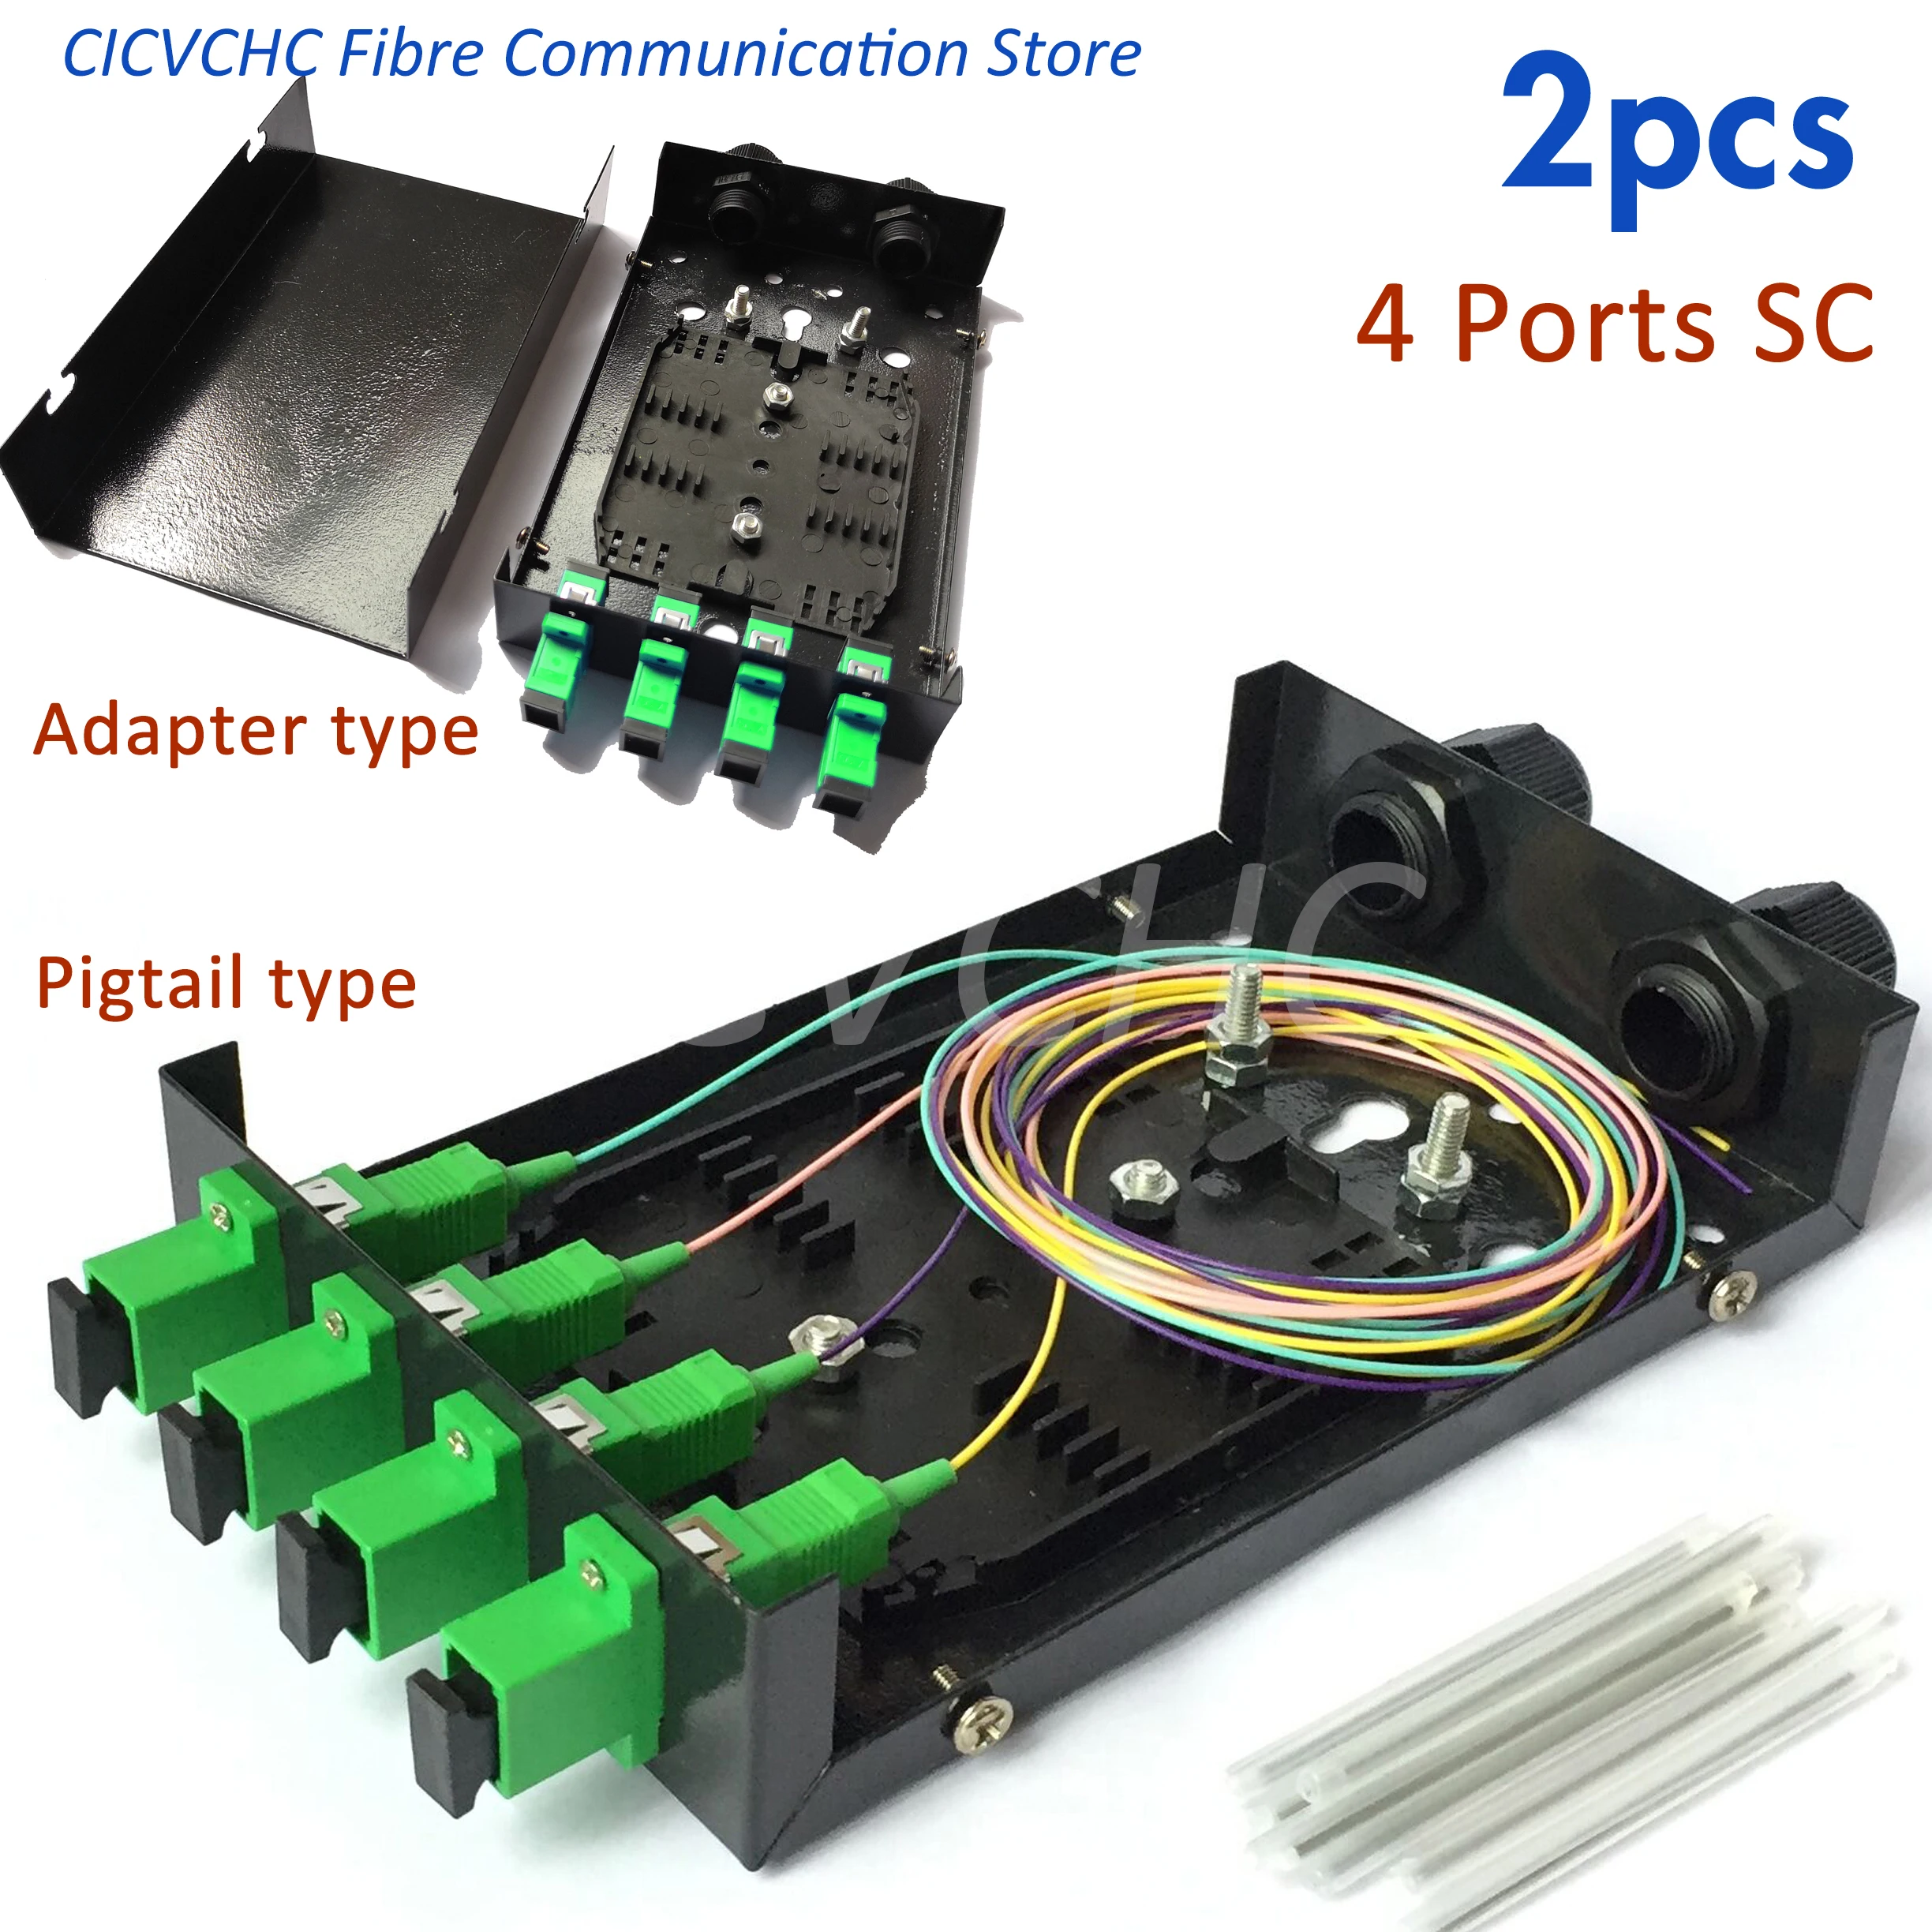 2pcs Fiber Terminal Box with 4 Port SC Adapter or pigtail and two Cable Gland for 3.5 to 8.5mm cable